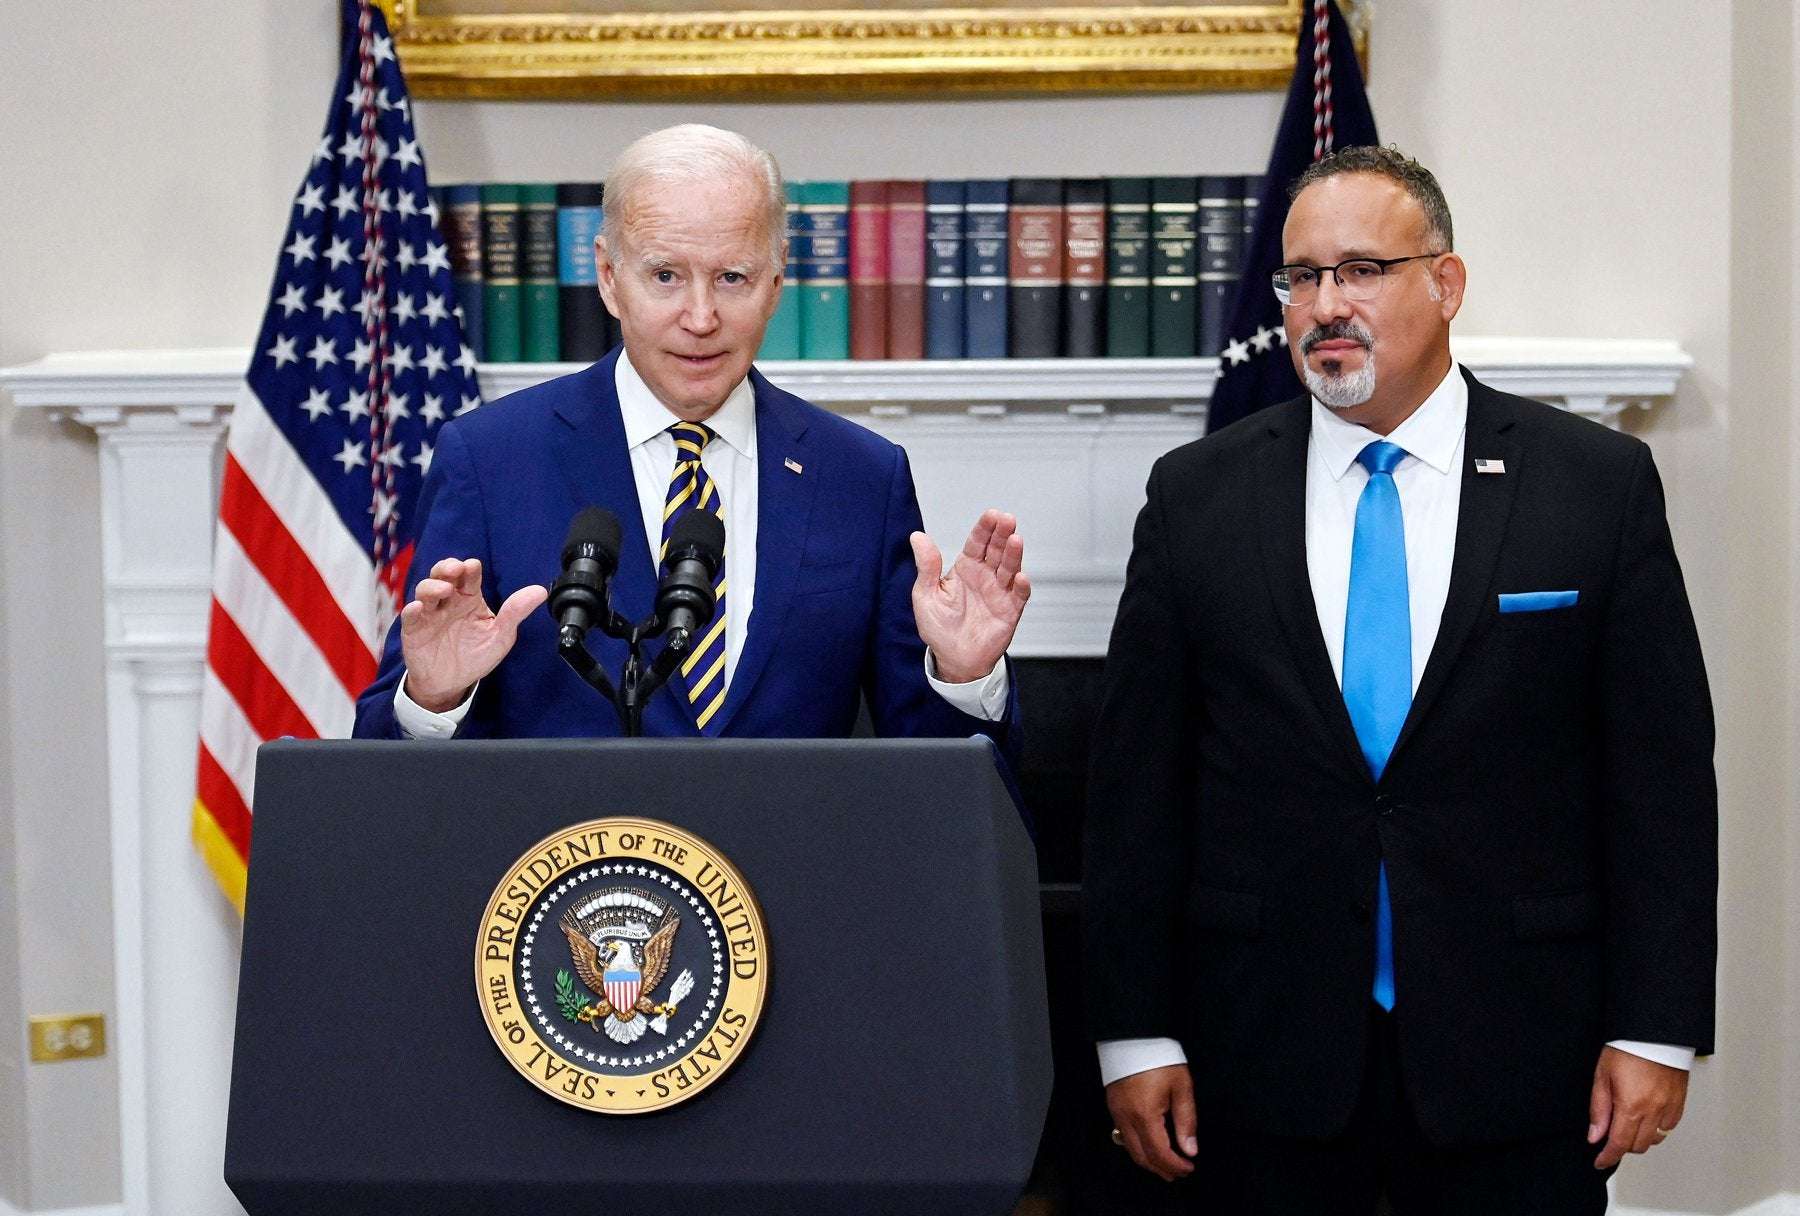 image for Republicans Are Melting Down Over Biden Making Life Easier for Millions of Americans